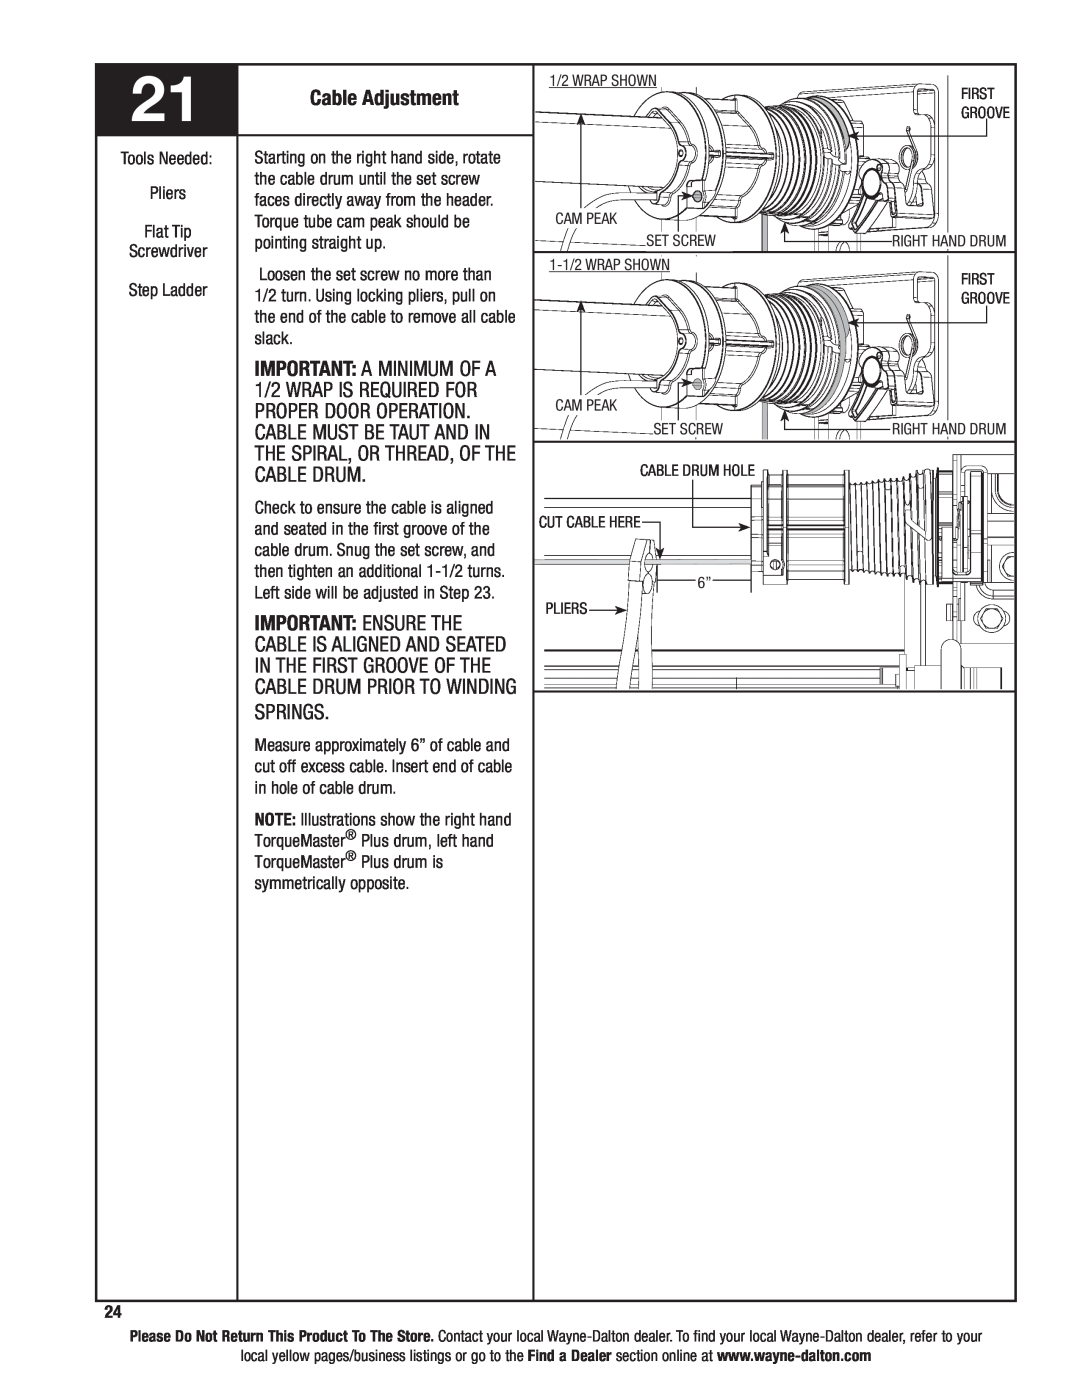 Wayne-Dalton 9400, 9100 Cable Adjustment, Cable must be taut and in, the spiral, or thread, of the, cable drum, Springs 